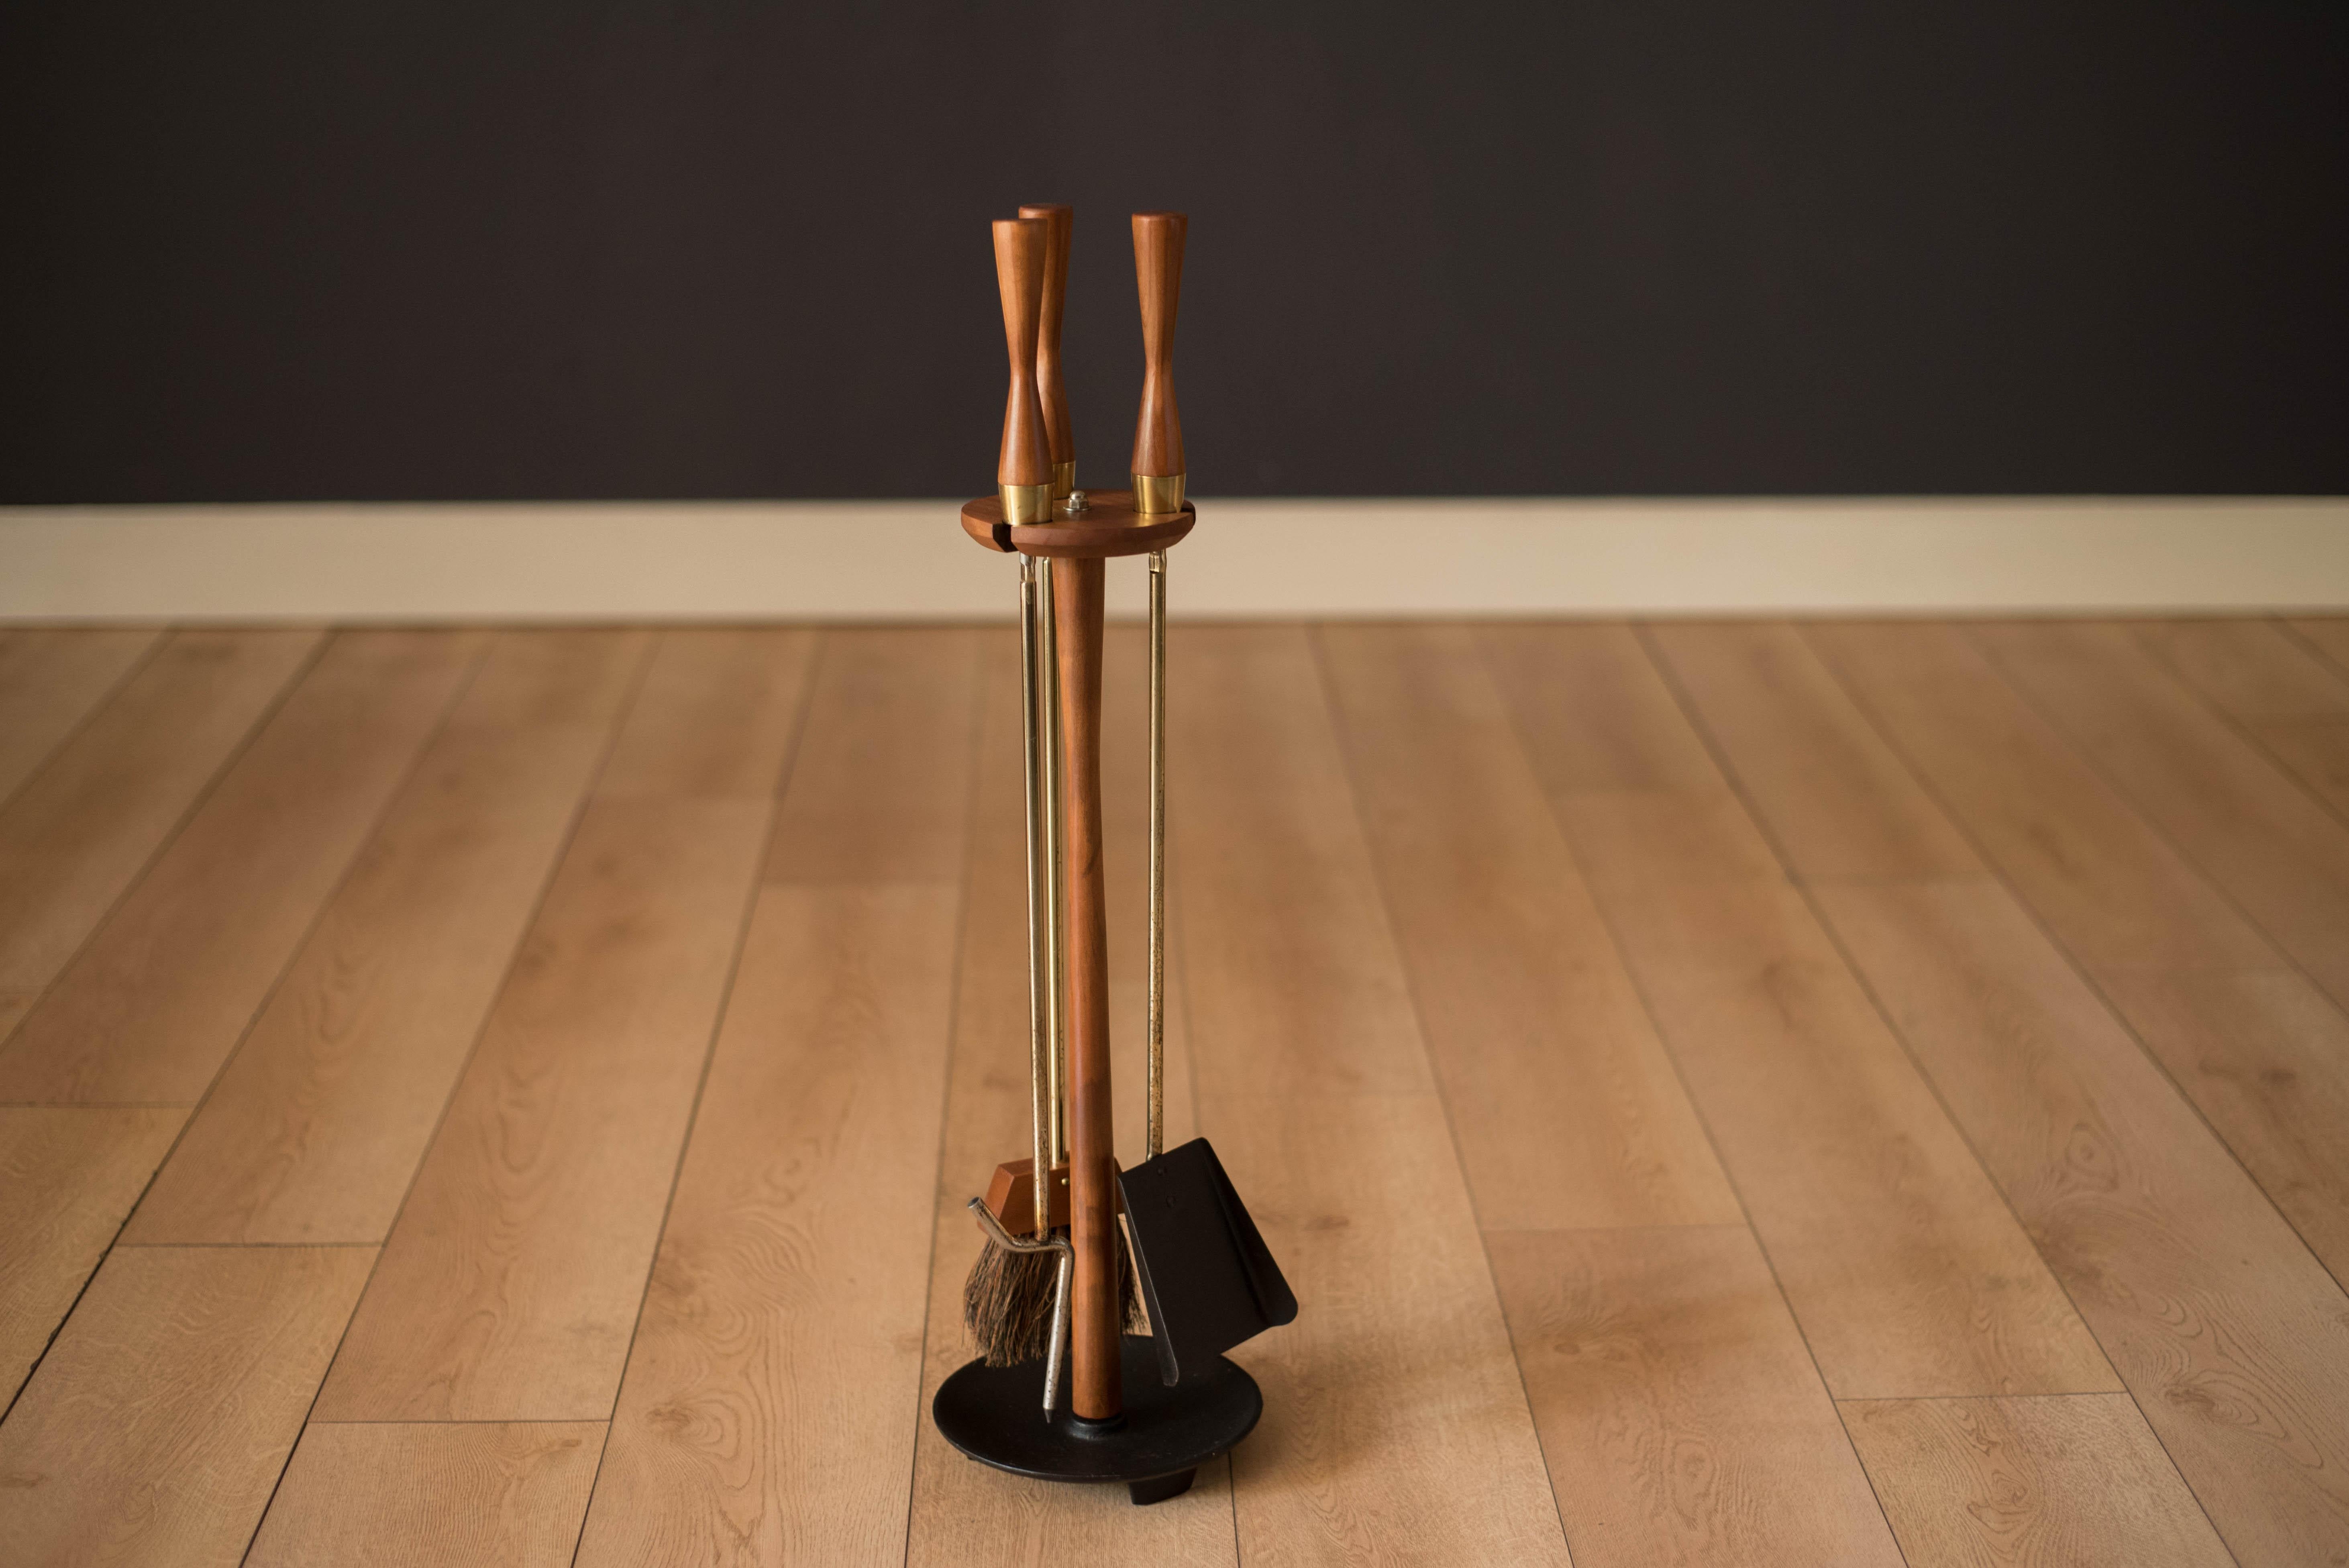 Vintage 3-piece fireplace tool set and floor stand, circa 1960s. This set is made in brass with sculpted wood handles. Includes poker, shovel, brush, and weighted cast iron floor stand.